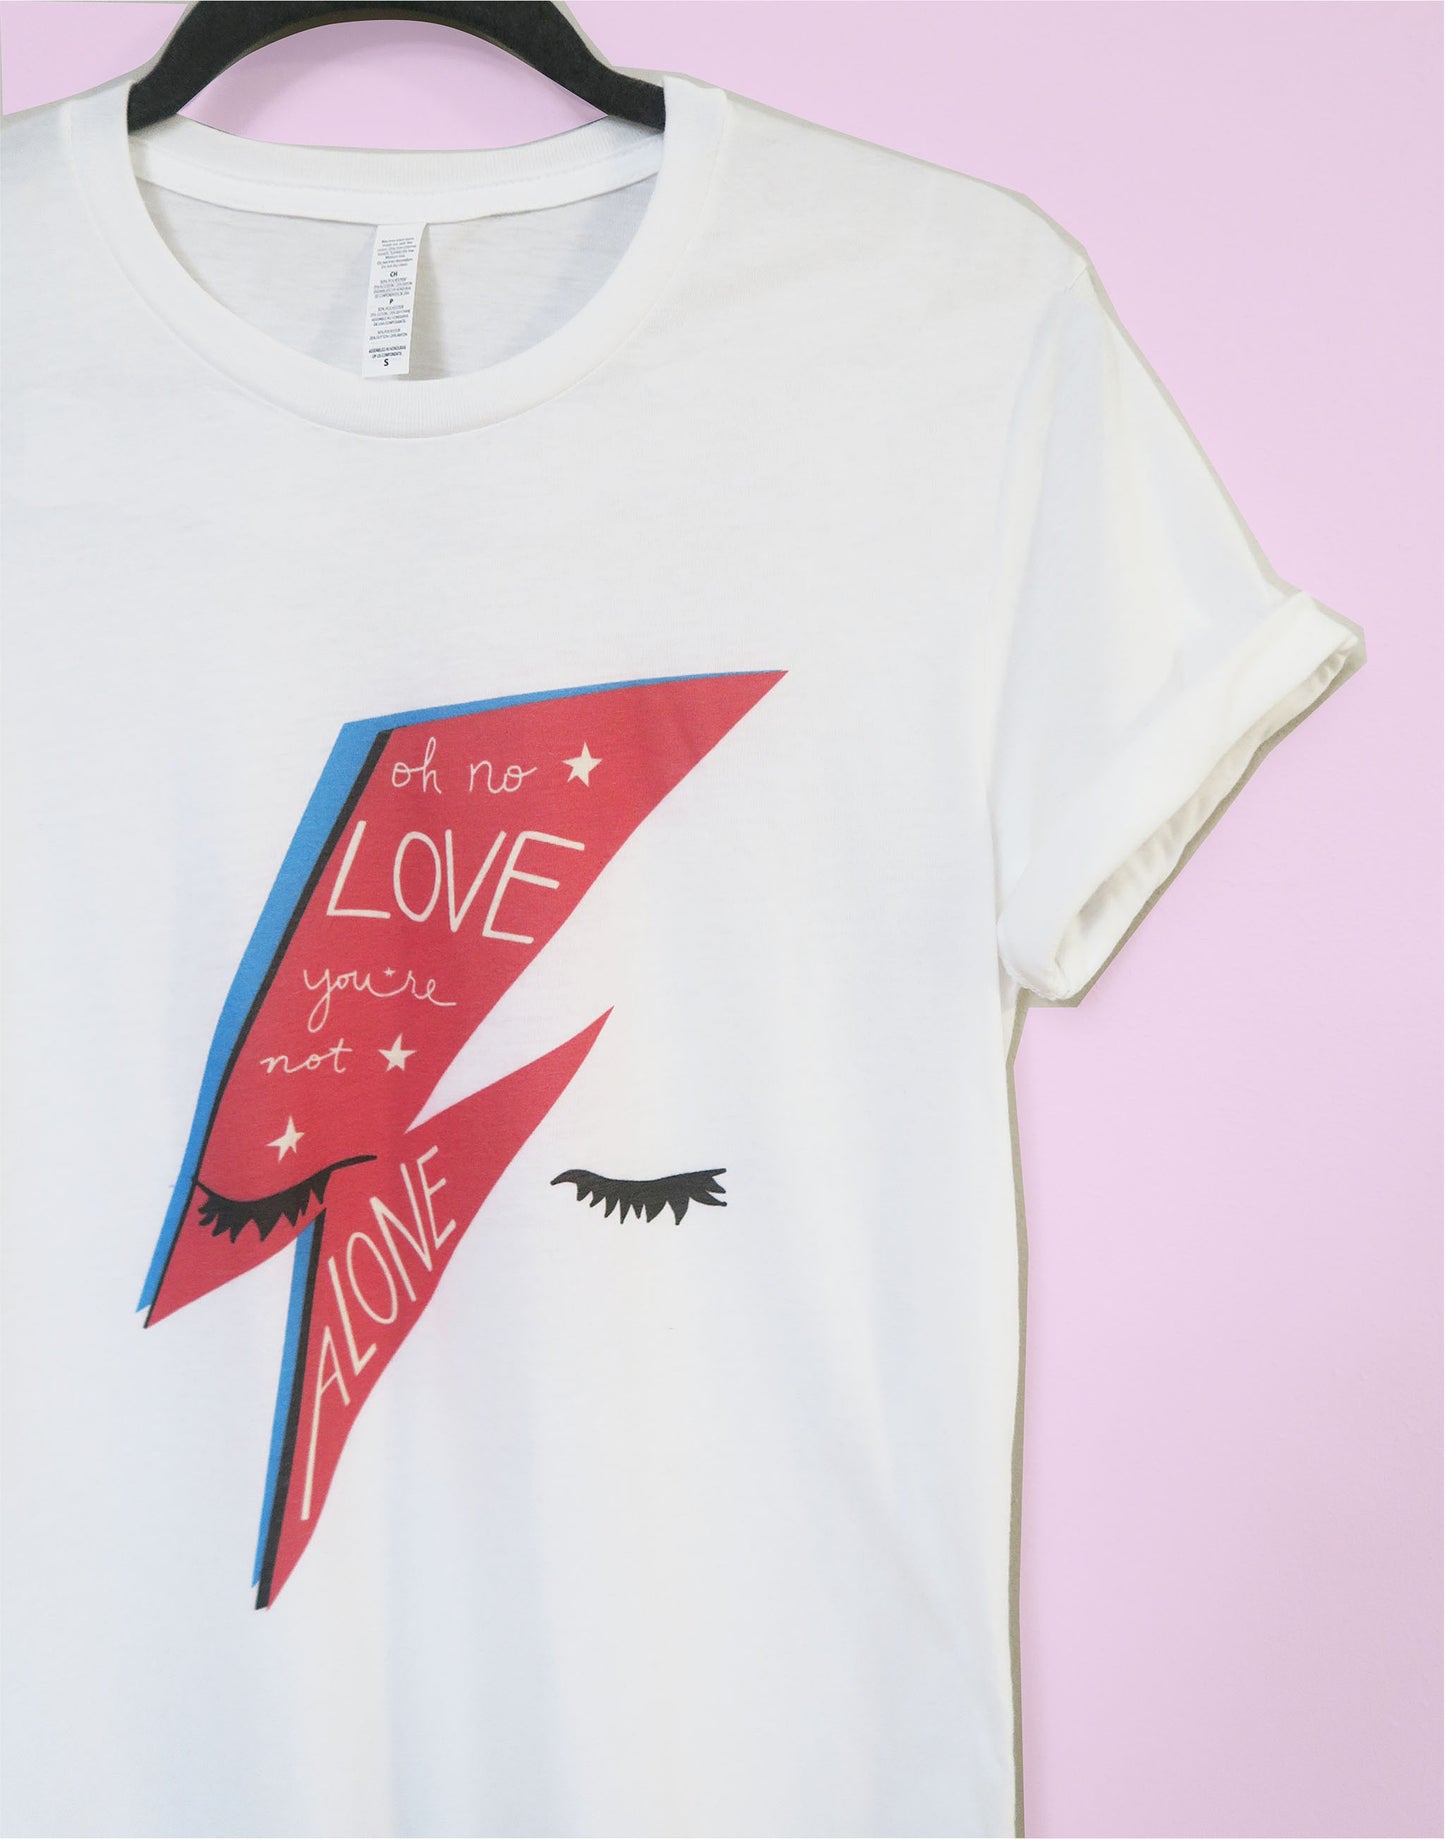 Bowie Oh no Love, You're Not Alone T-Shirt